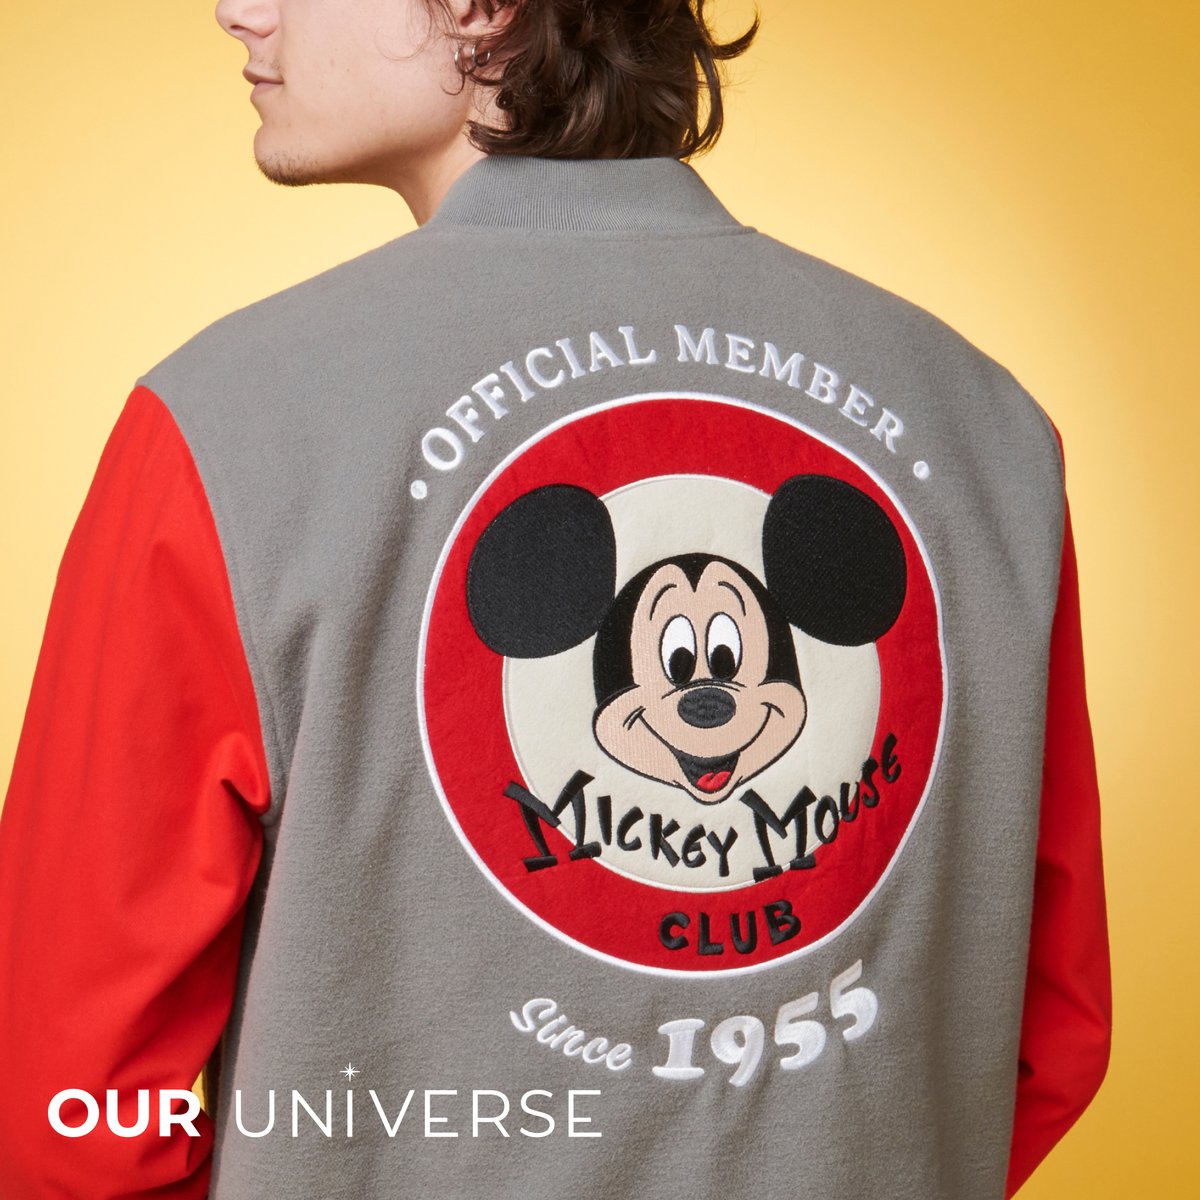 This Our Universe varsity jacket is a game changer. di.sn/6011uva3U